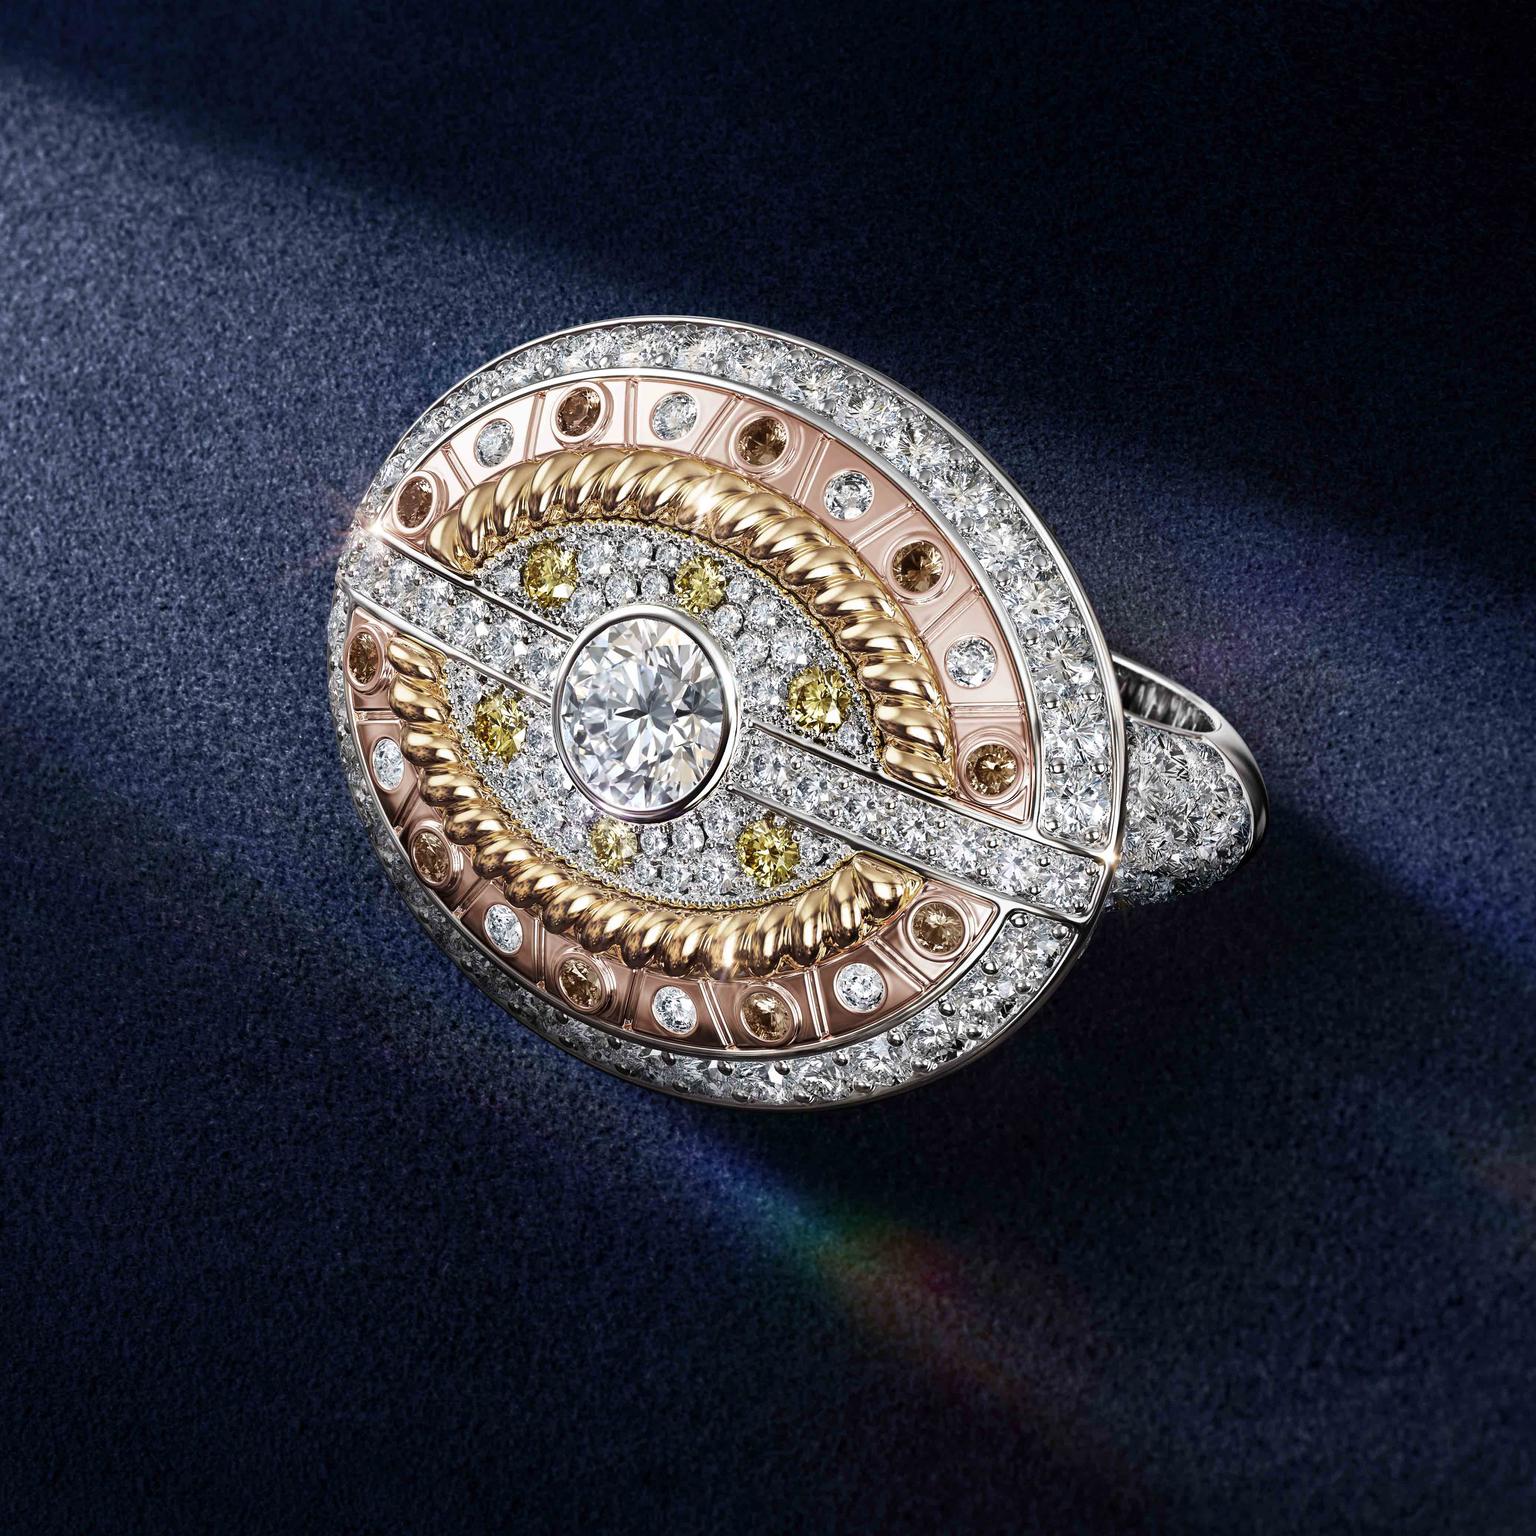 Prelude Cocktail ring by De Beers